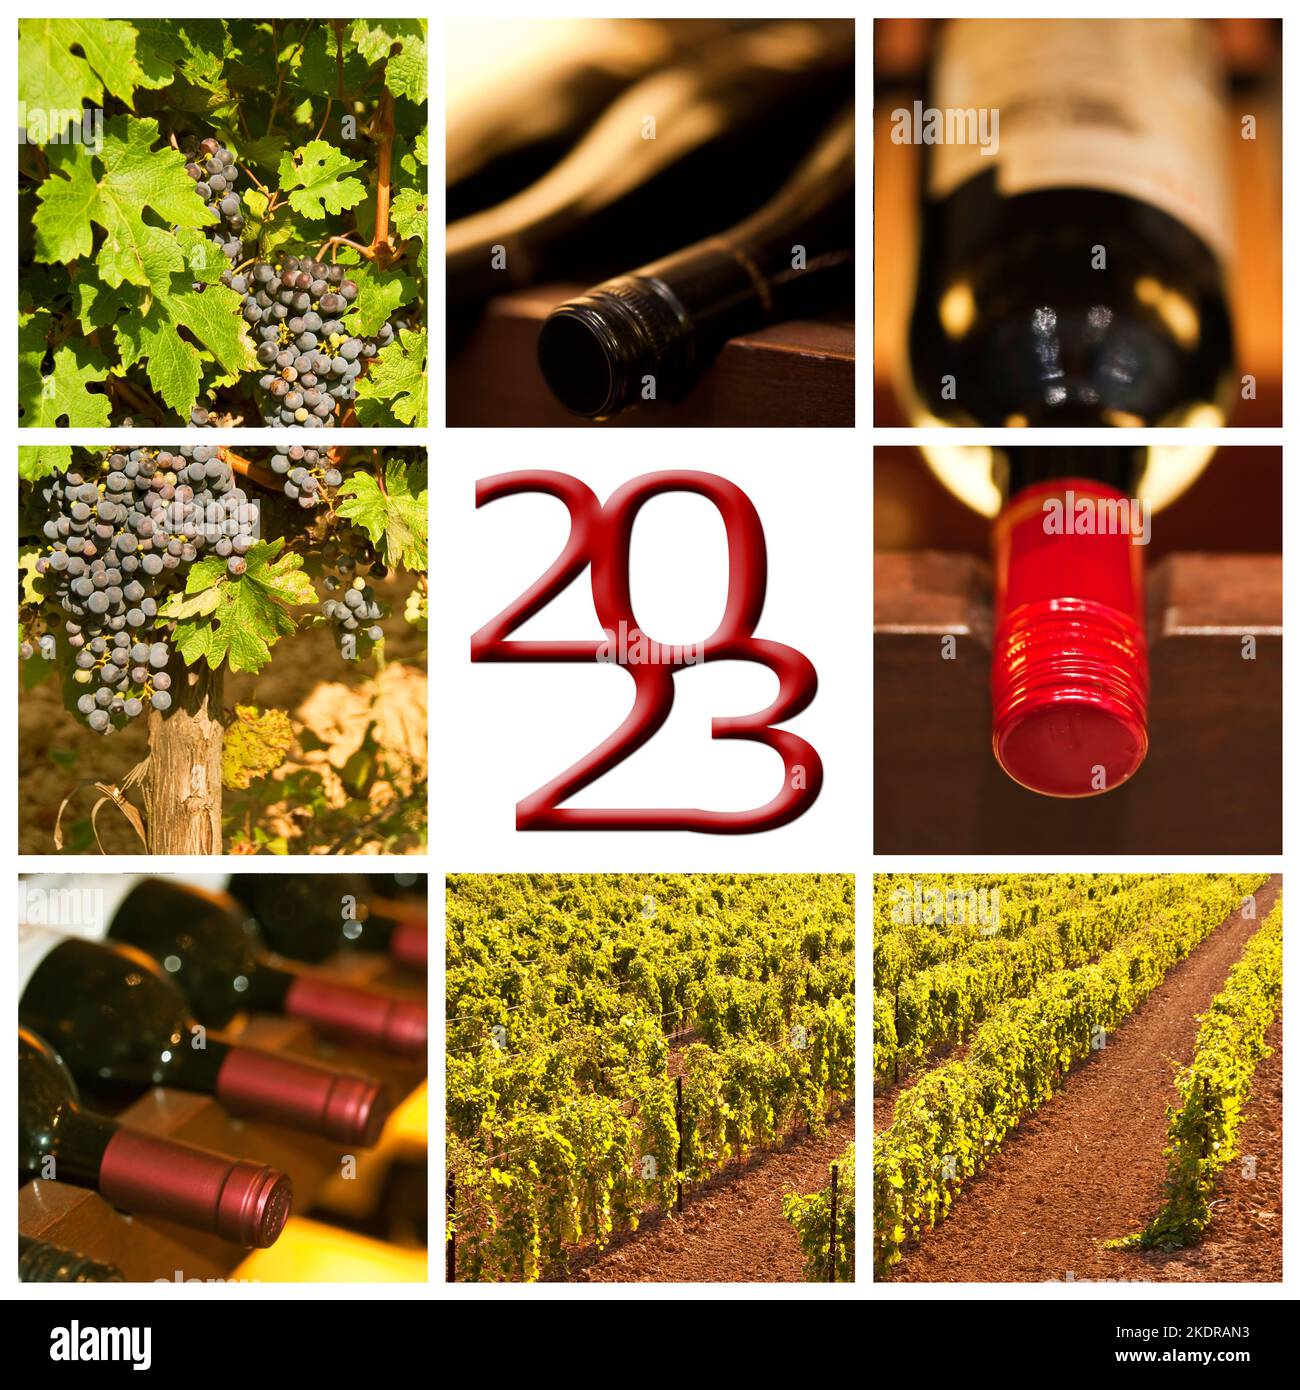 2023 red wine square photos collage greeting card Stock Photo